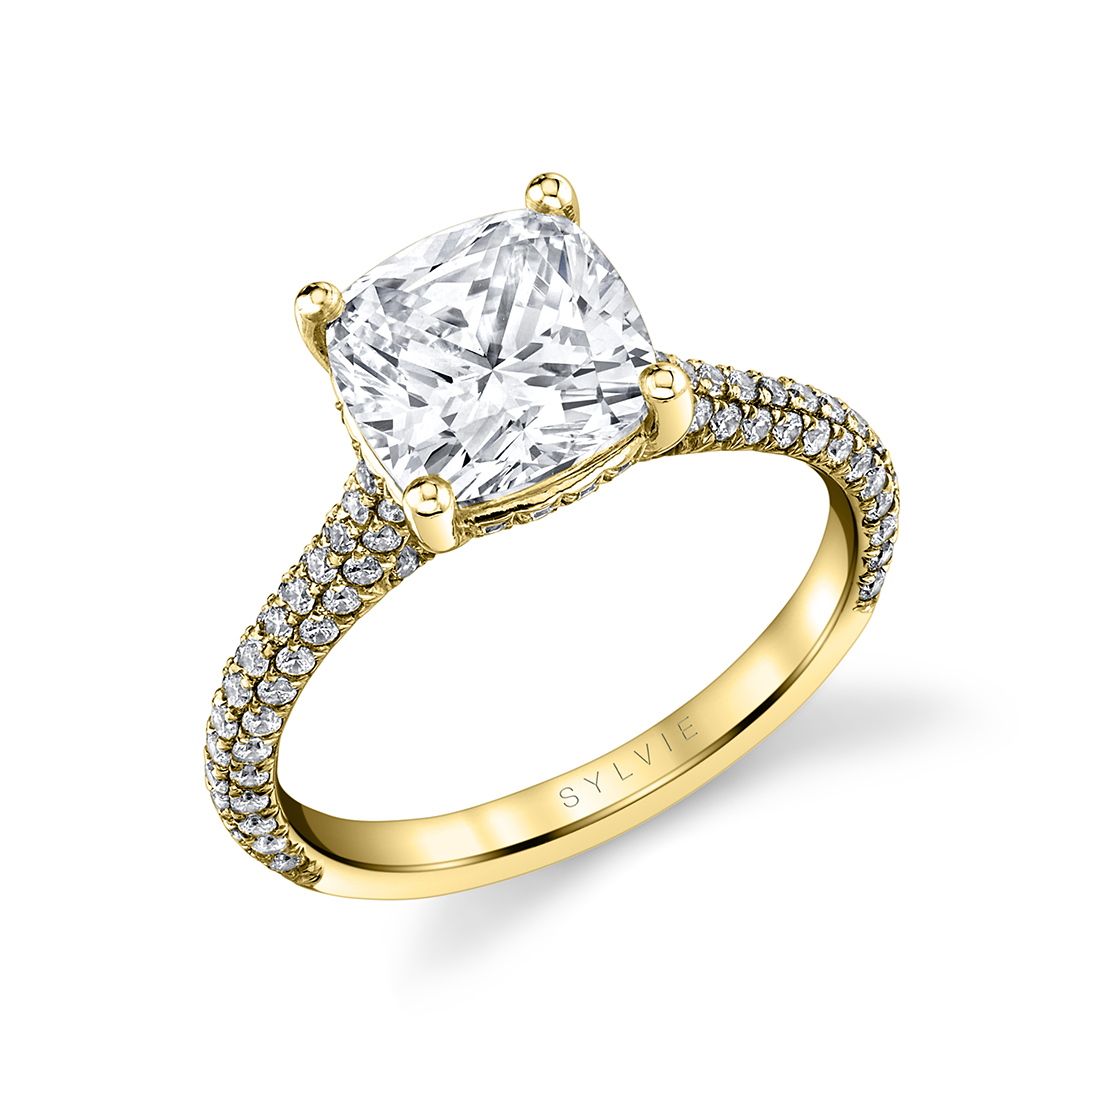 cushion cut pave engagement ring with hidden halo in yellow gold